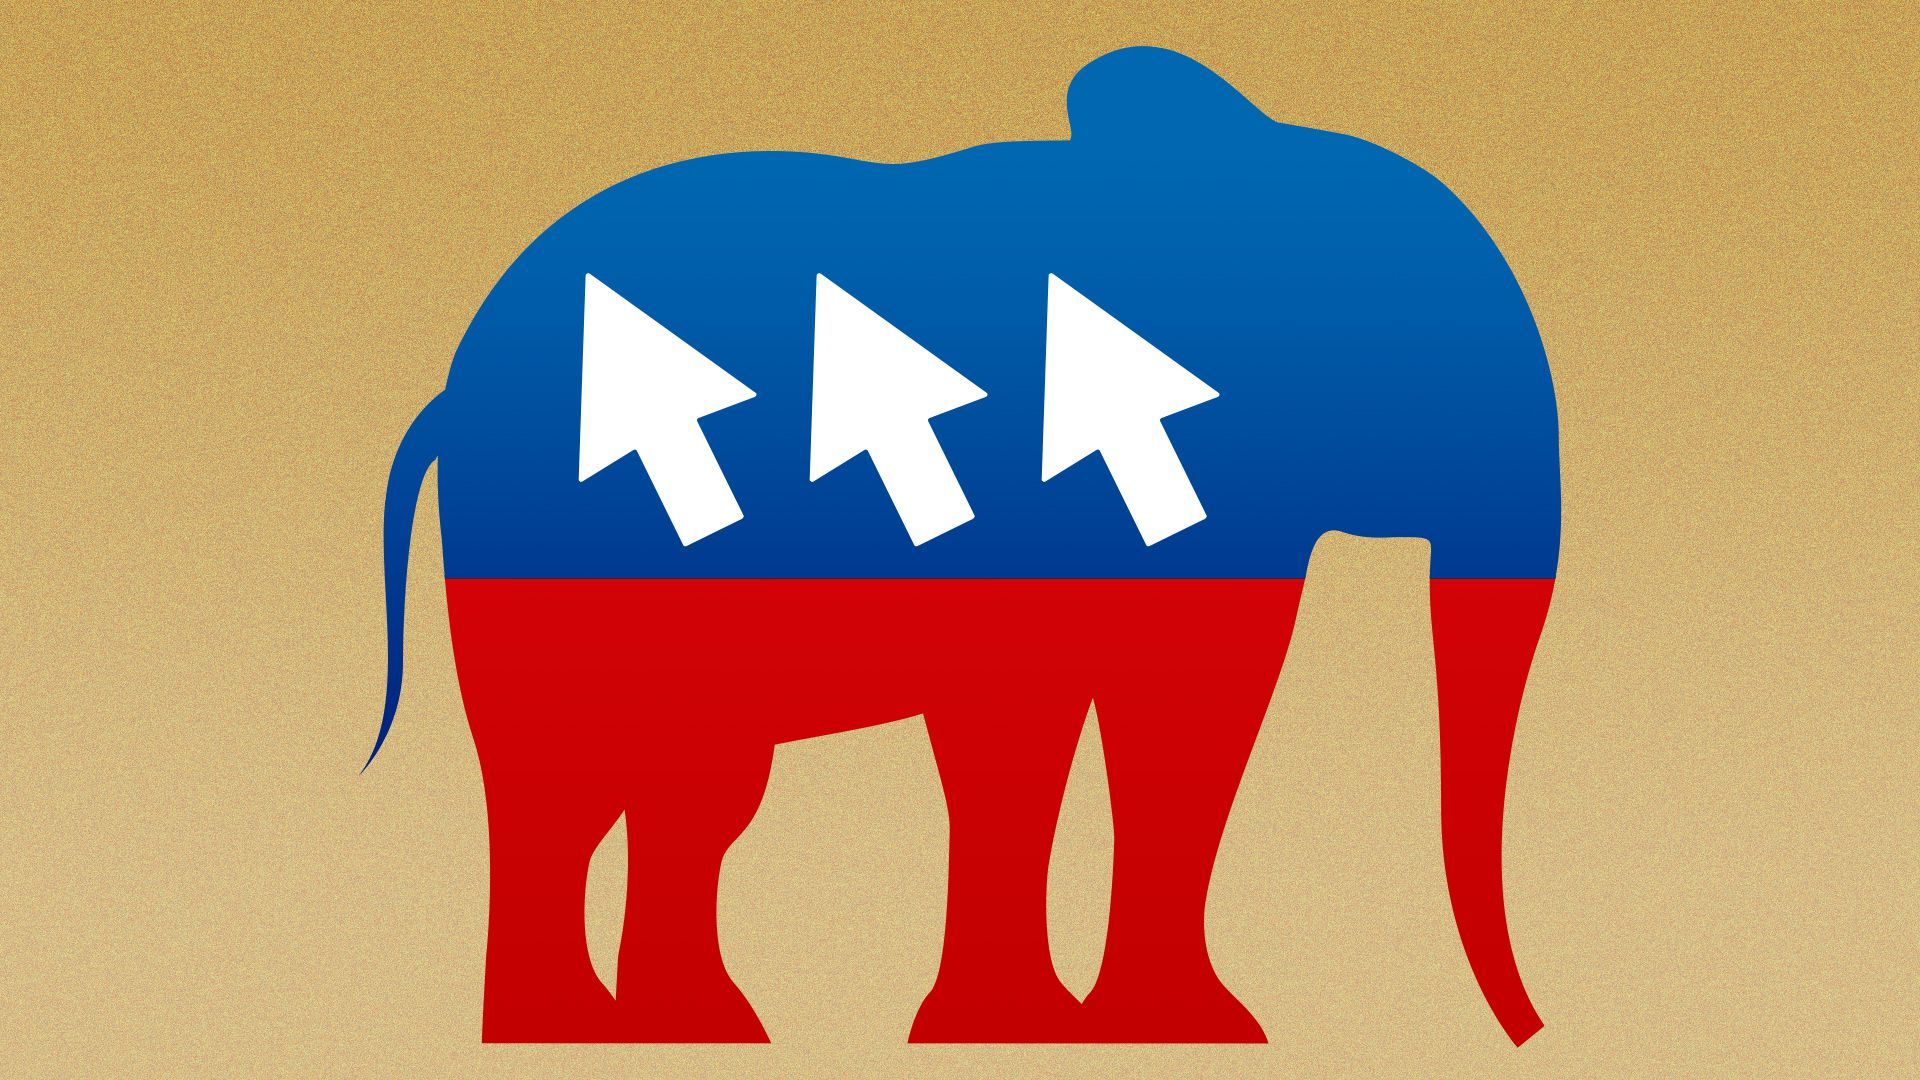 Illustration of the Republican elephant icon with cursor arrows in place of stars